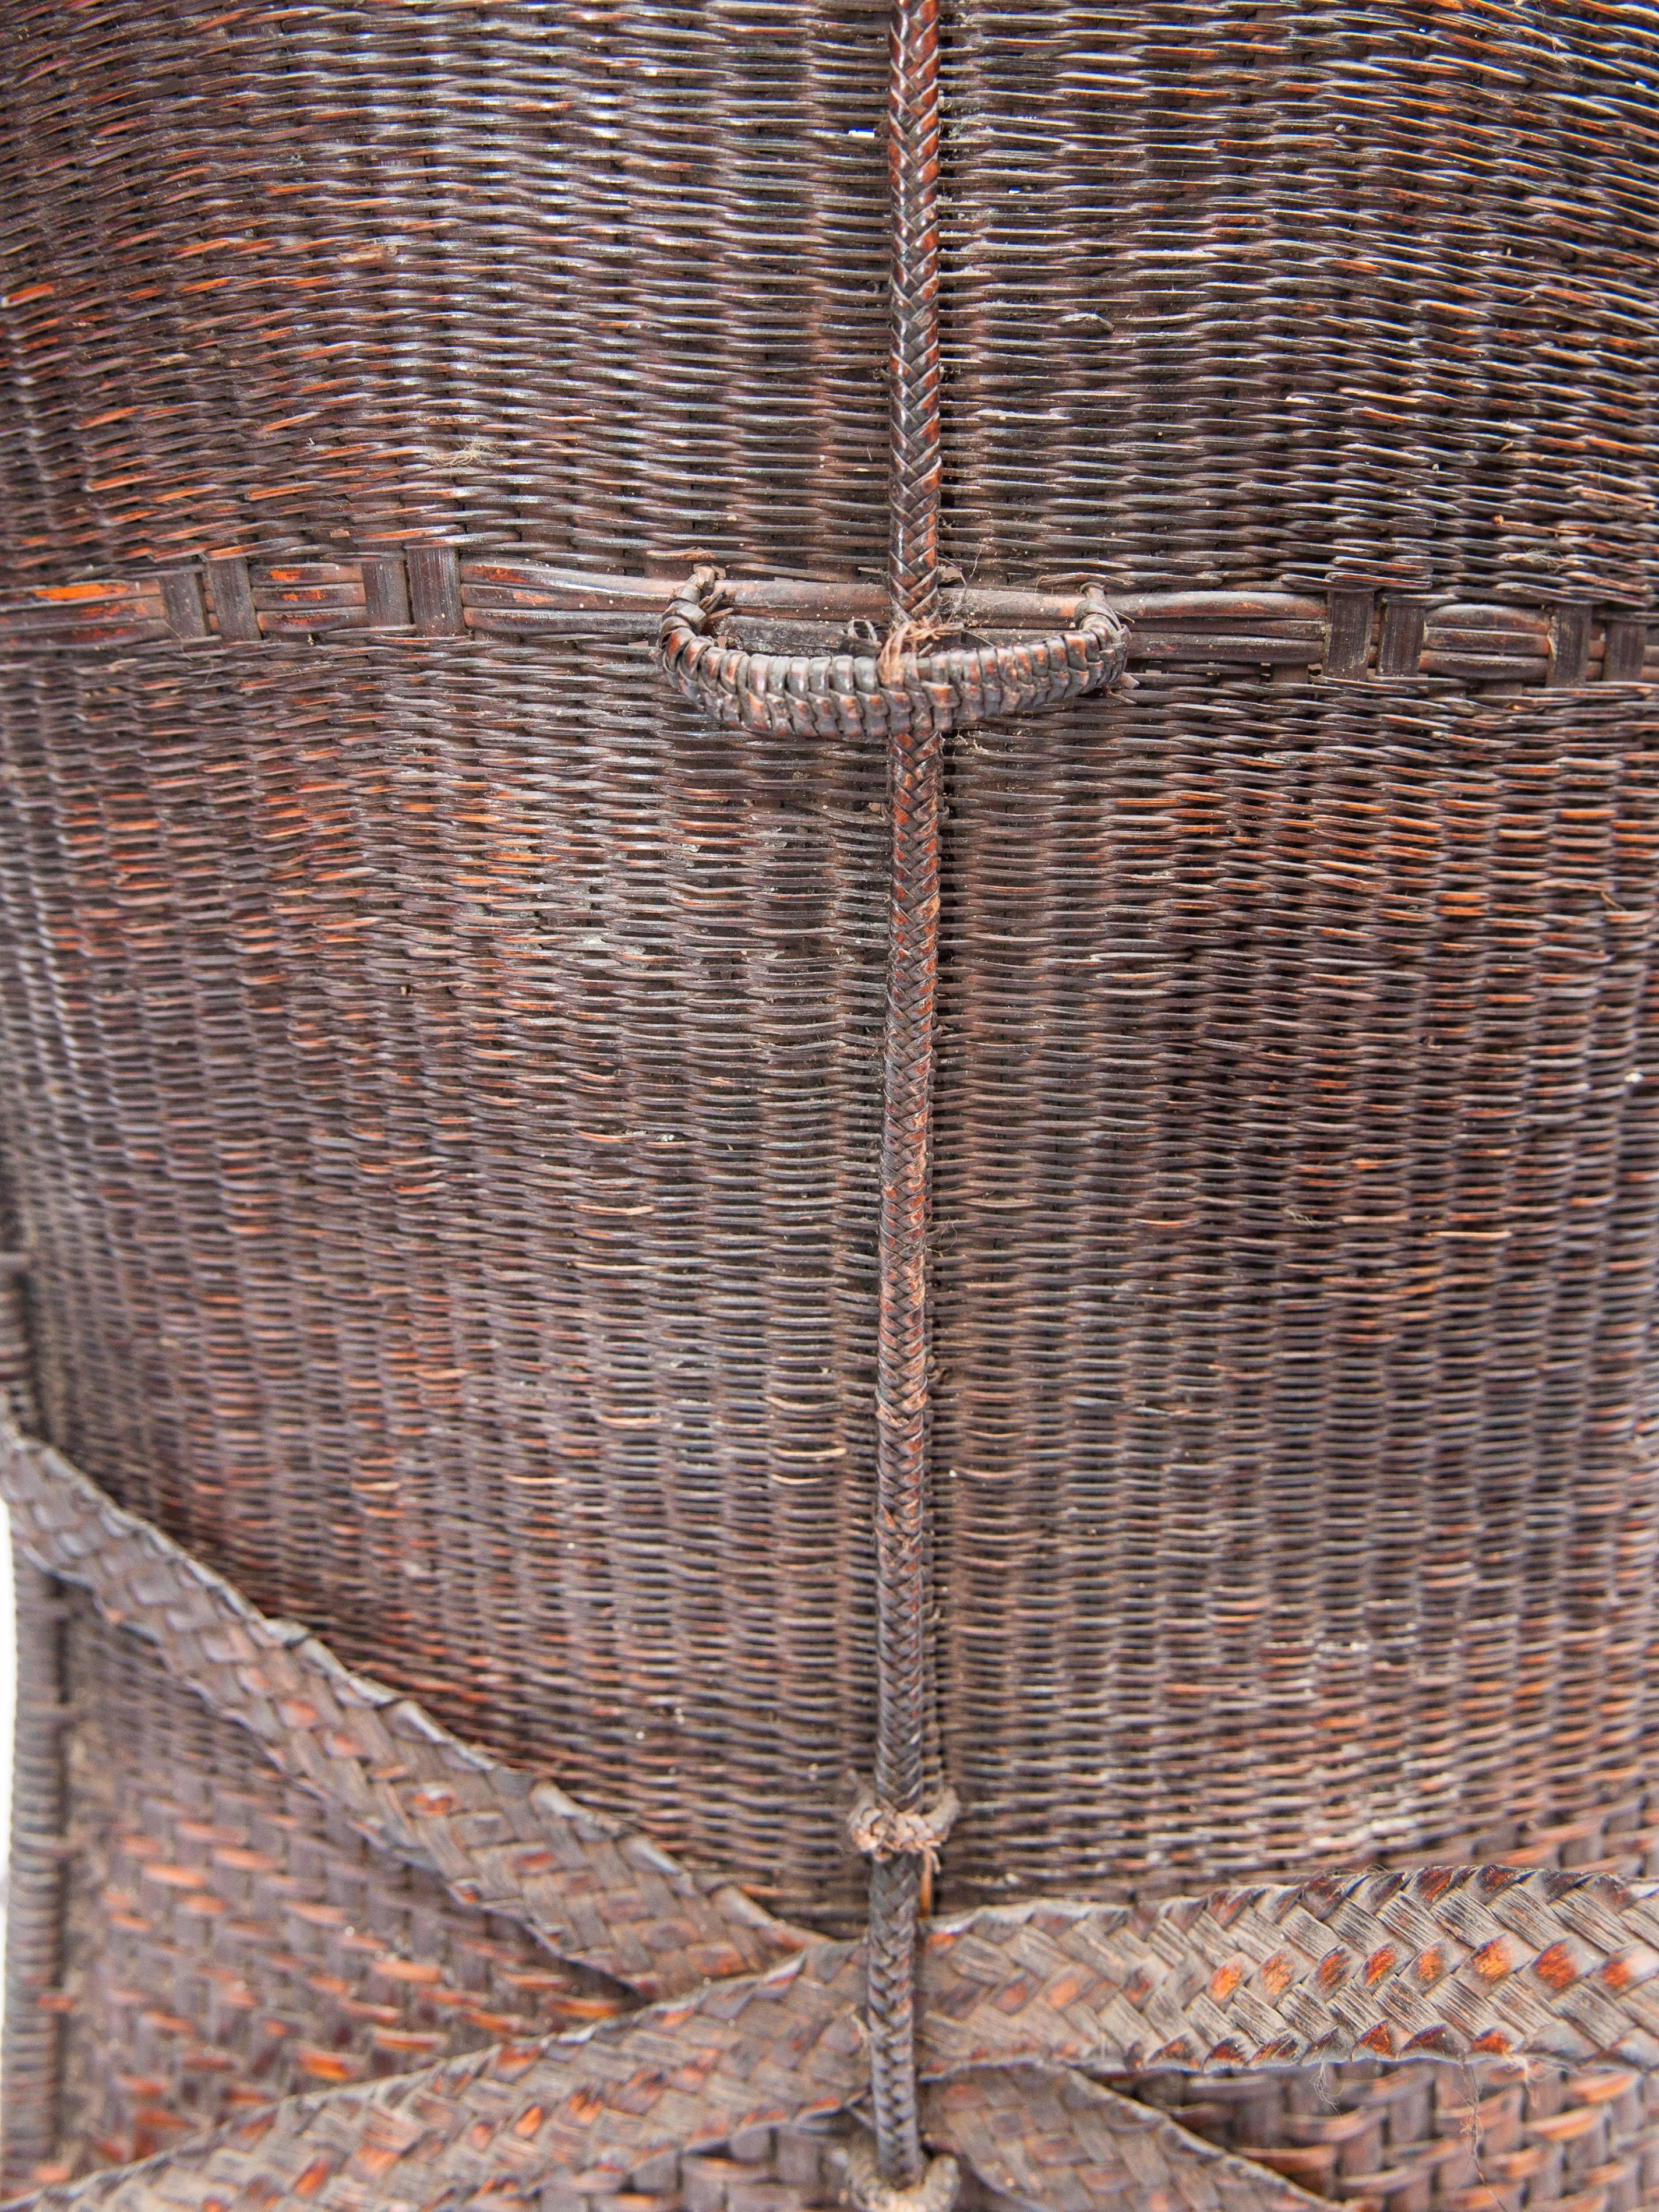 Tribal Carrying Basket from Laos, Mid-20th Century, Bamboo, Rattan, Wood Base 5